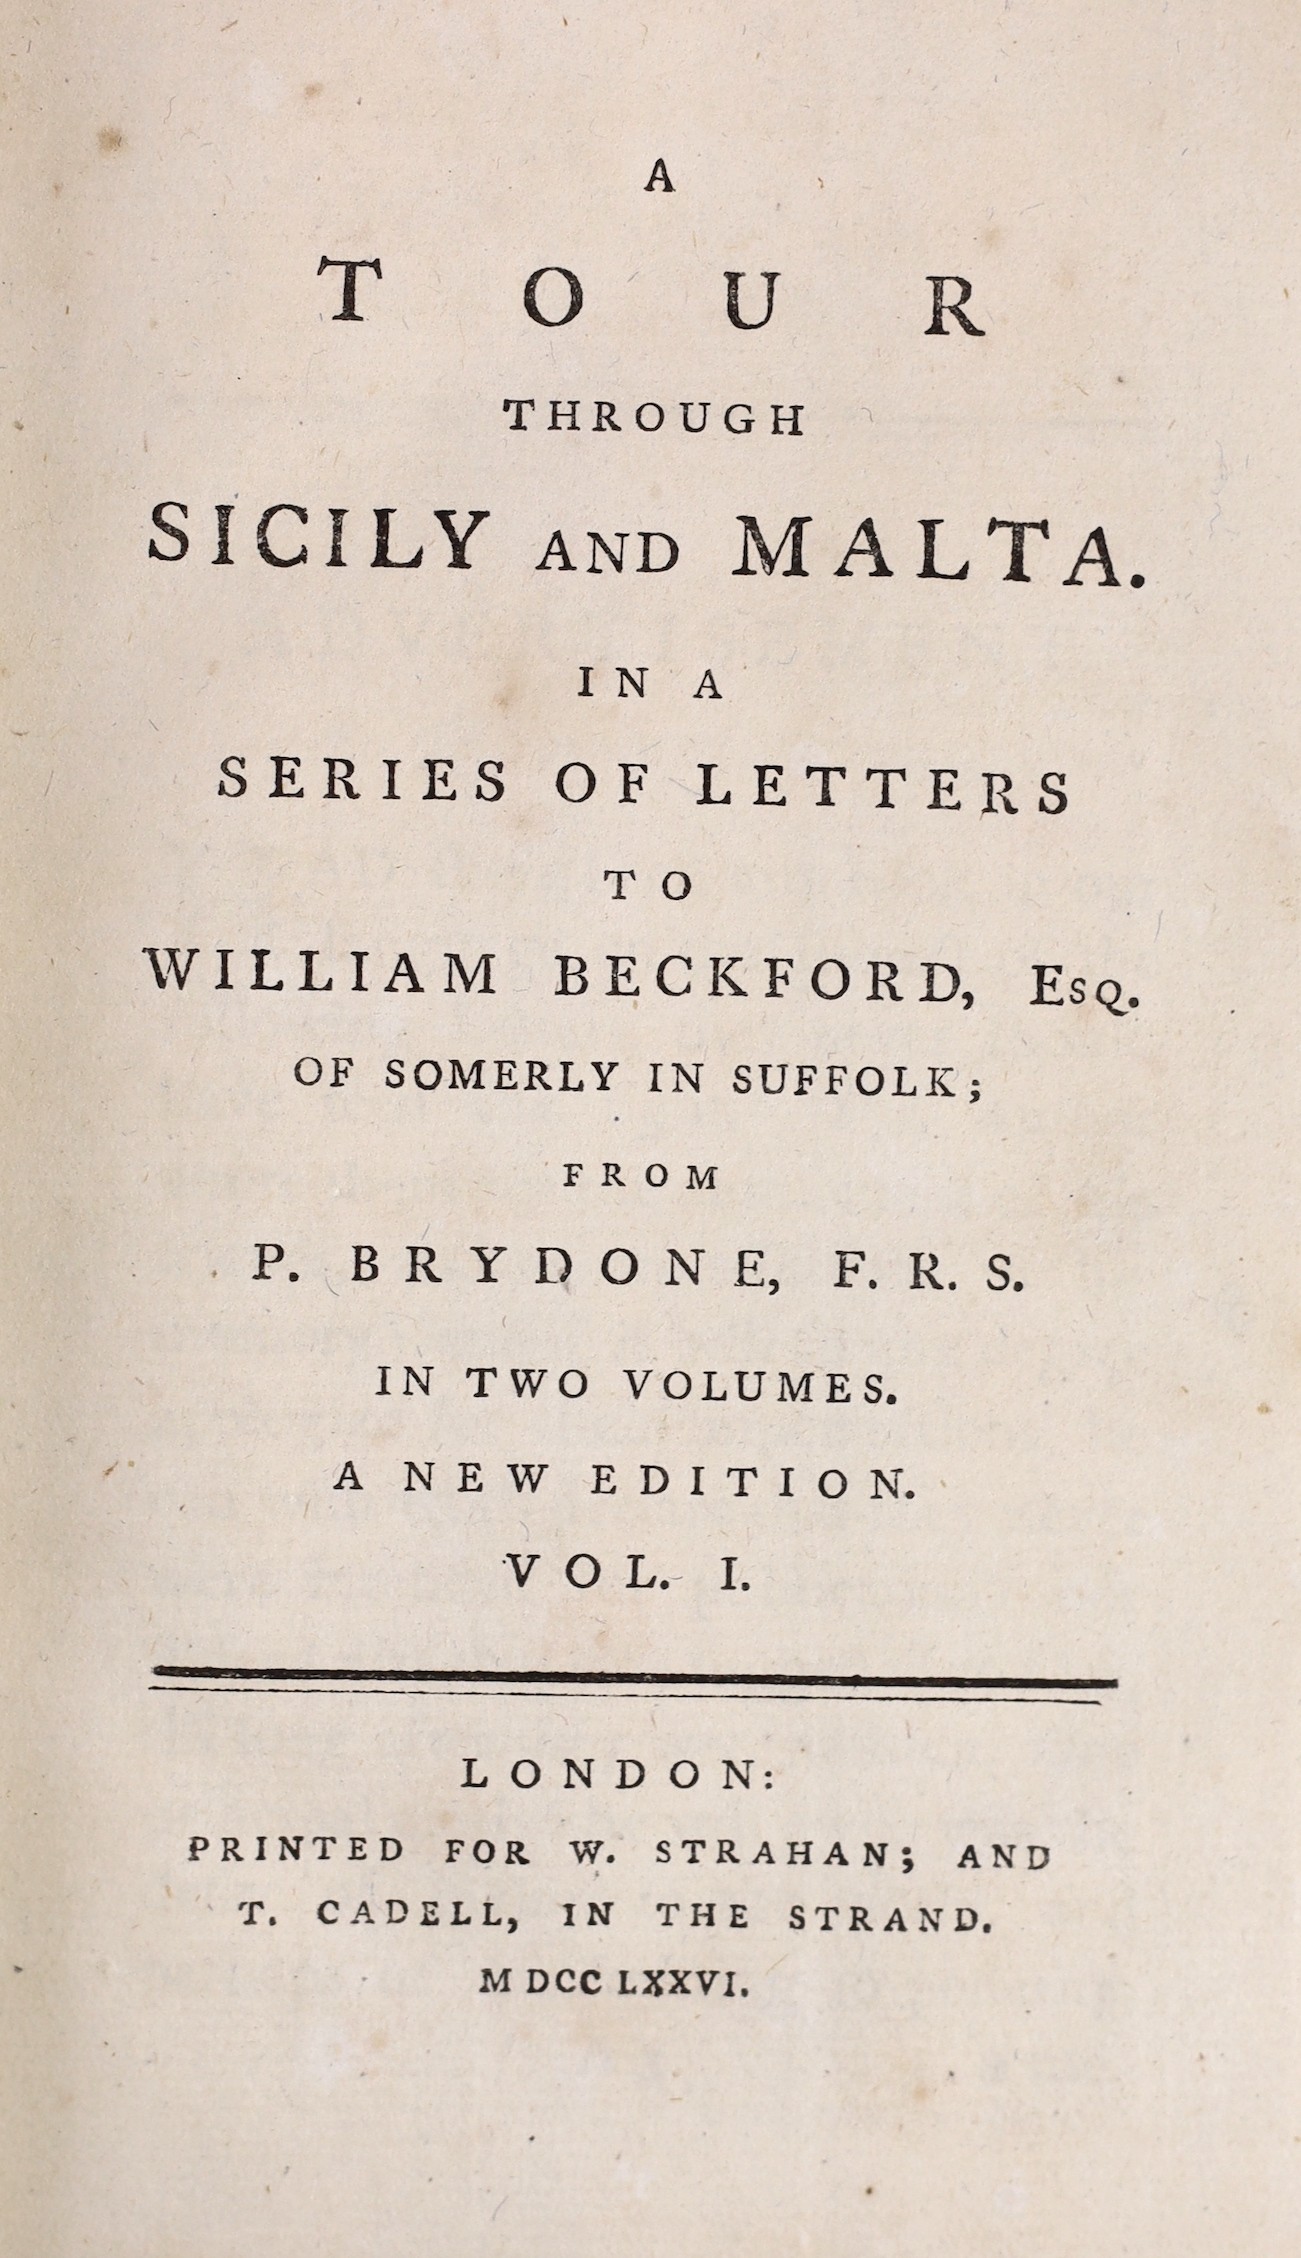 Brydone, Patrick - A Tour through Sicily and Malta. In a series of letters to William Beckford ,Esq. ... First edition, 2 vols, half title, errata leaf; old calf with panelled spines (distressed). 1773